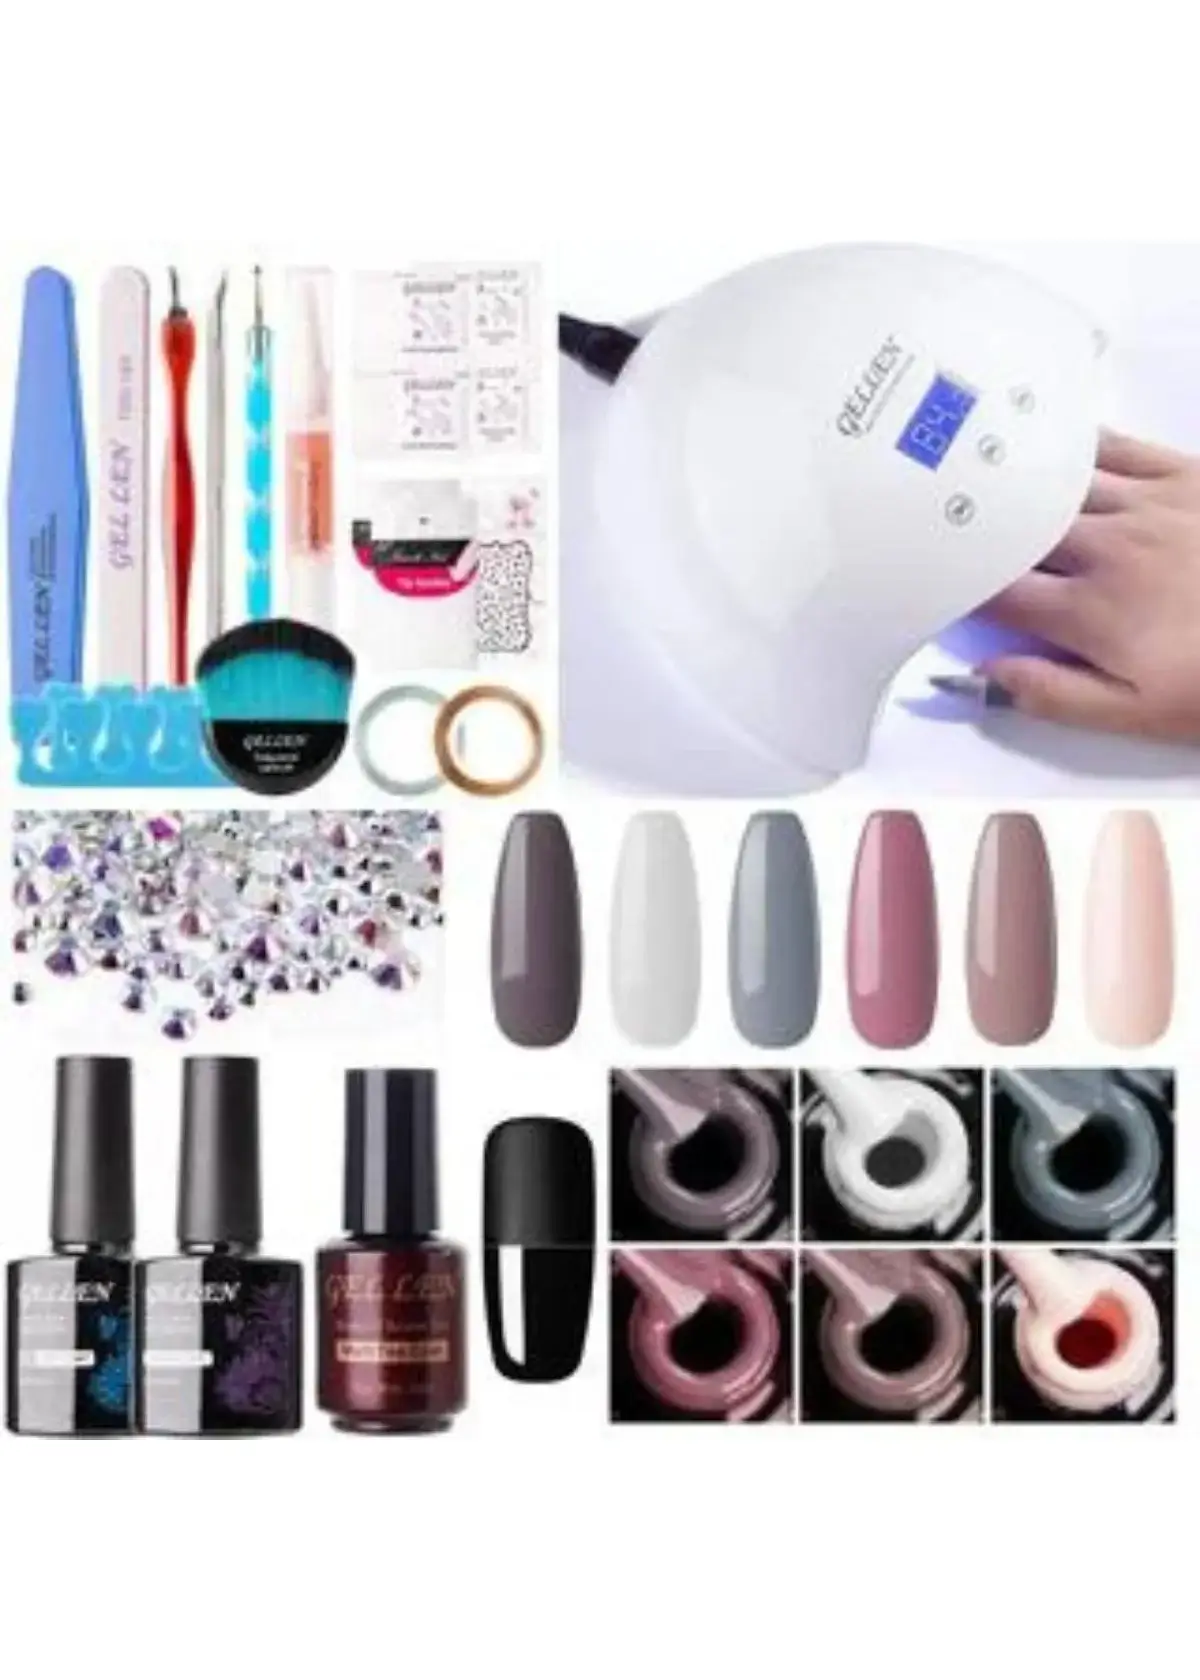 How to choose the right at home gel manicure kit?